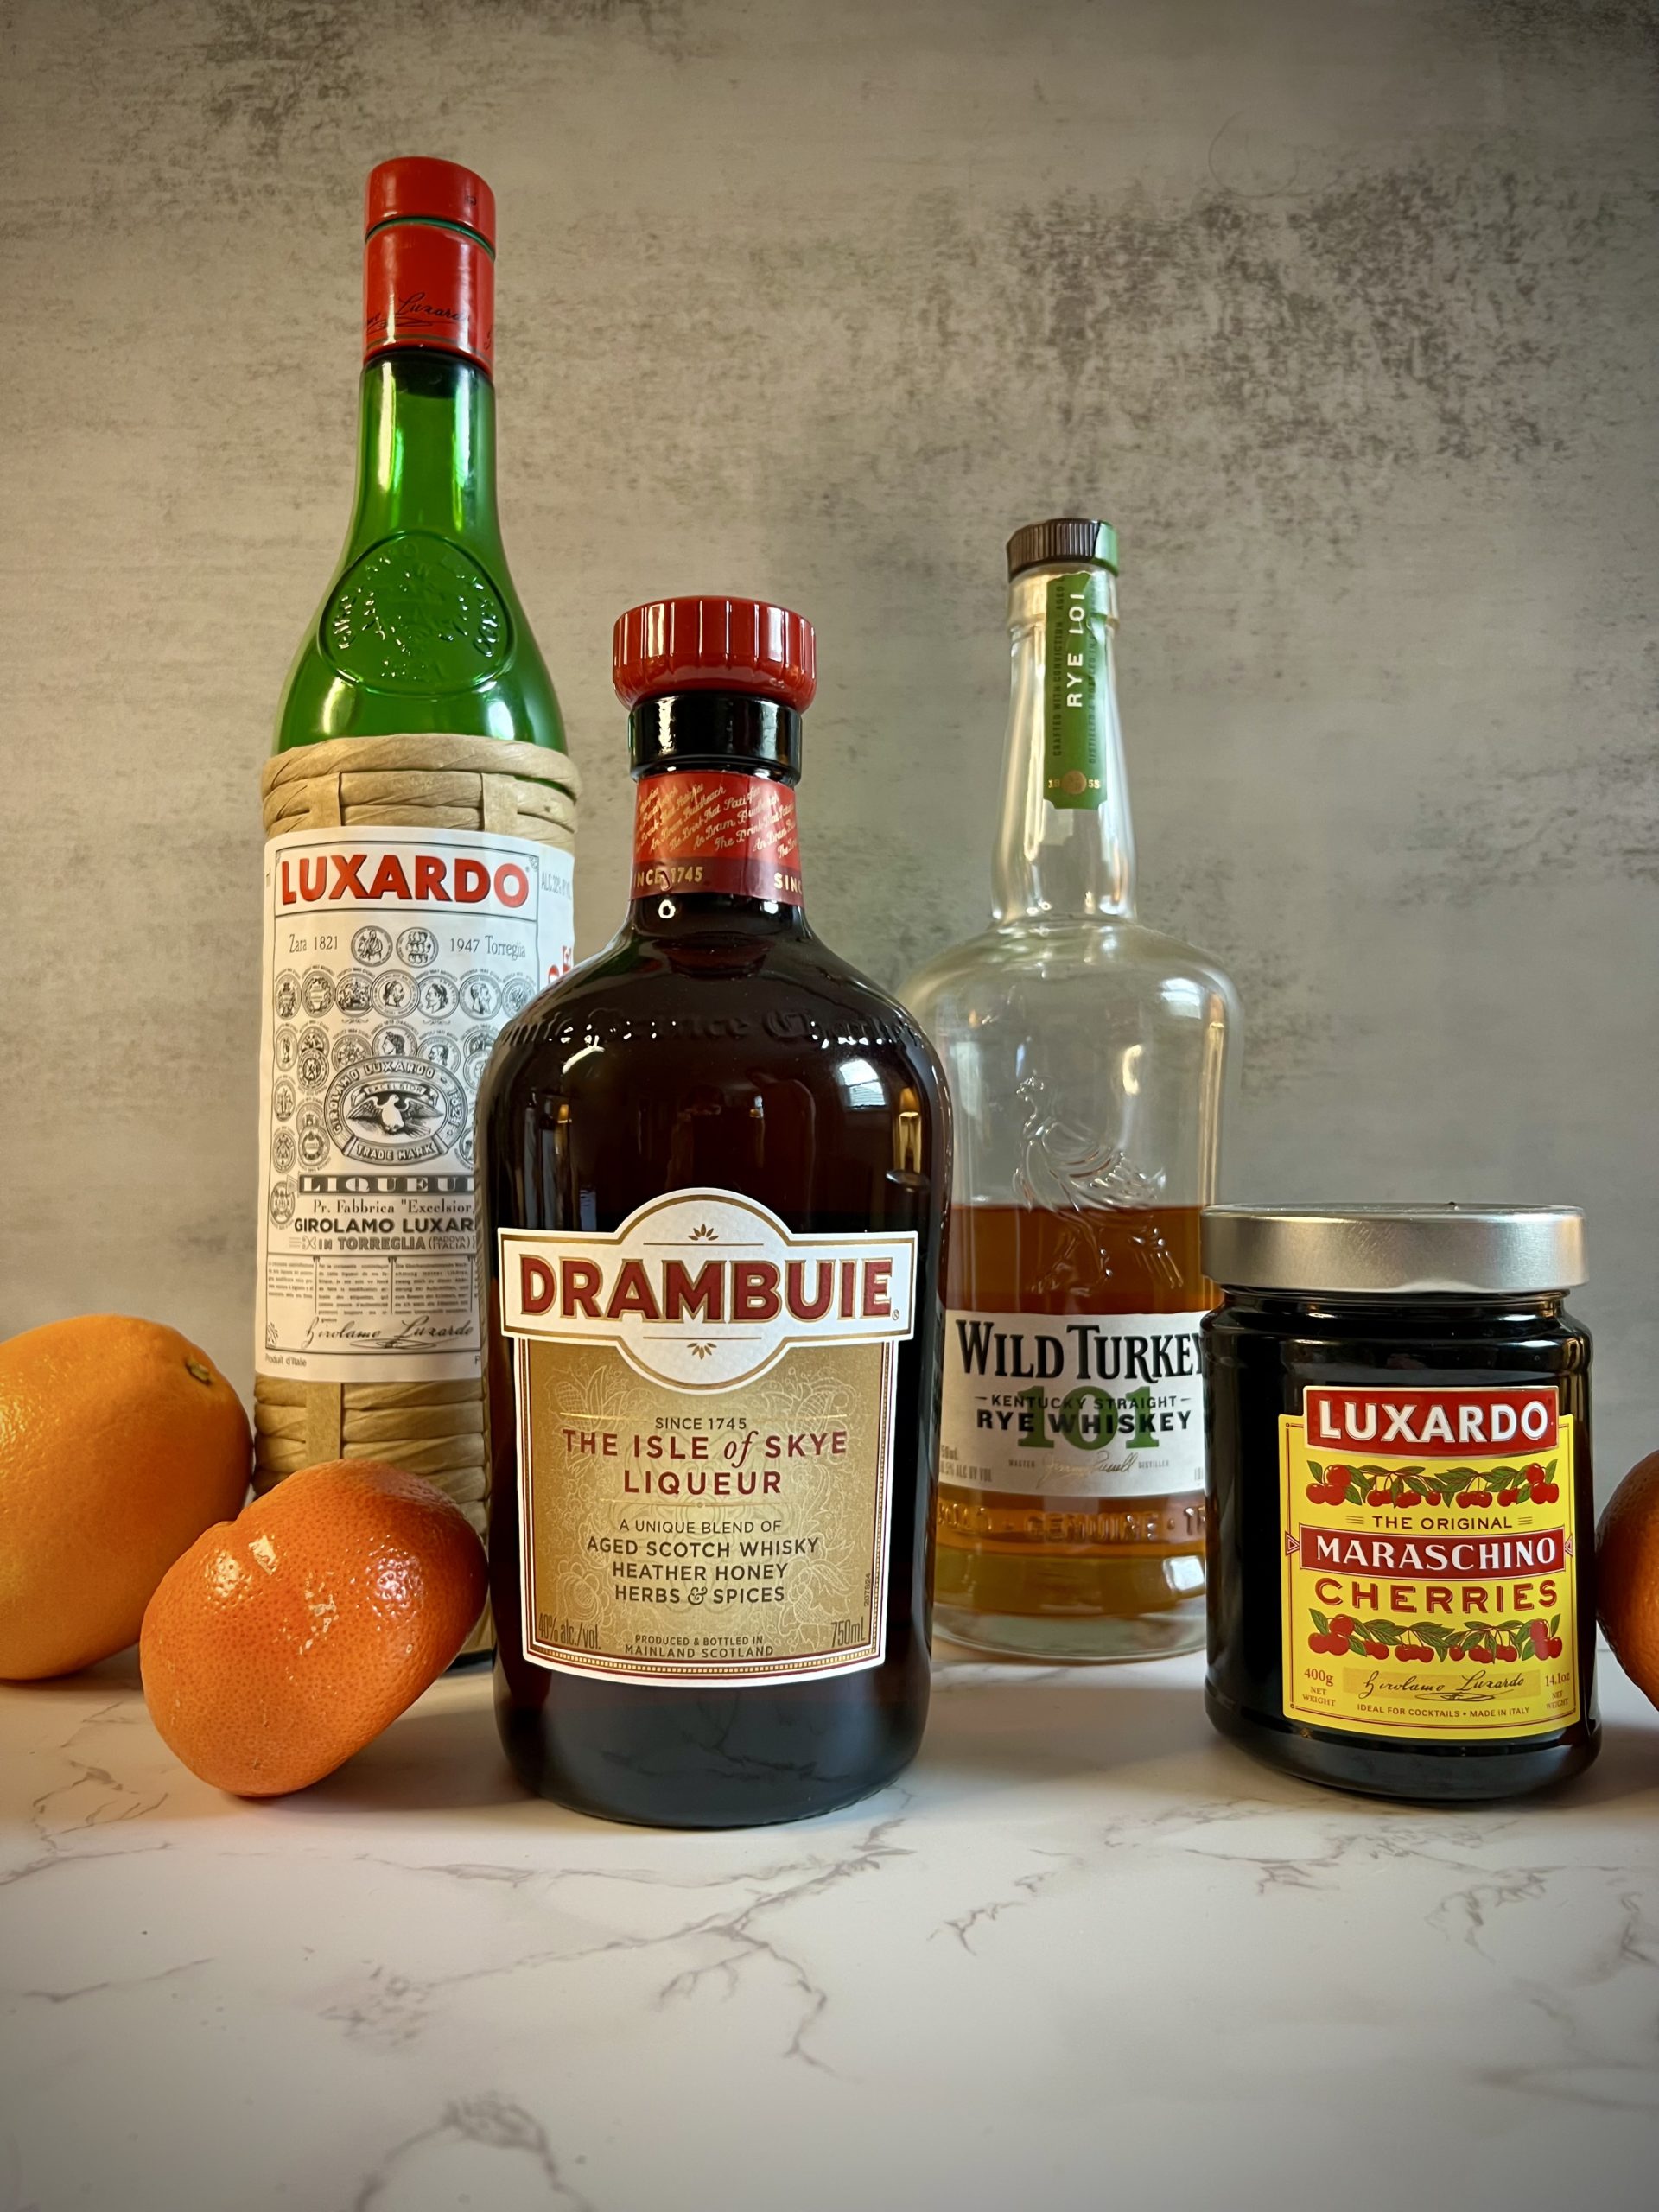 A bottle of Luxardo Maraschino Originale, Drambuie, Wild Turkey Rye 101, and Luxardo cherries on a counter surrounded by oranges.